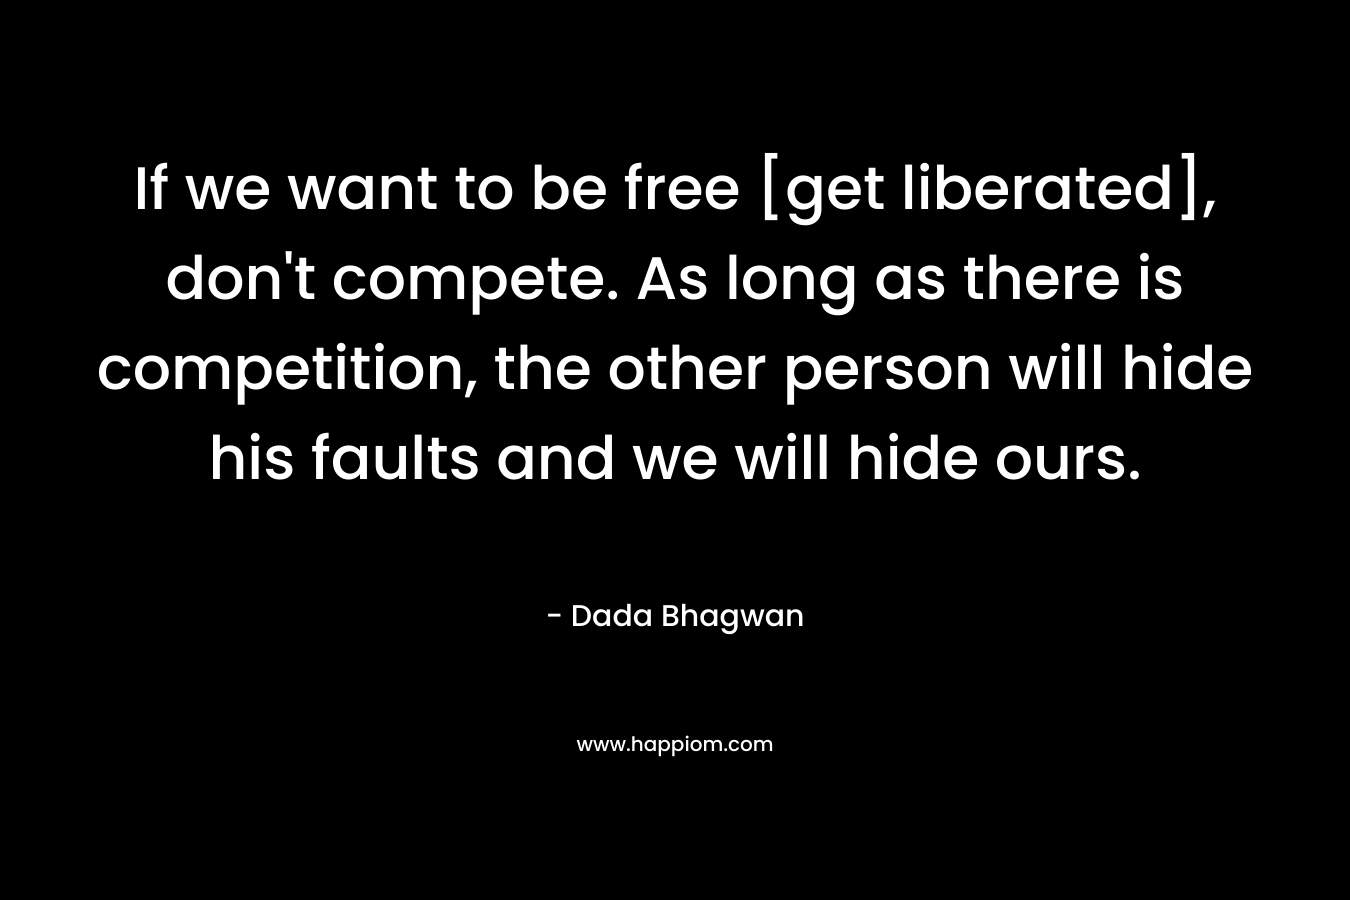 If we want to be free [get liberated], don’t compete. As long as there is competition, the other person will hide his faults and we will hide ours. – Dada Bhagwan